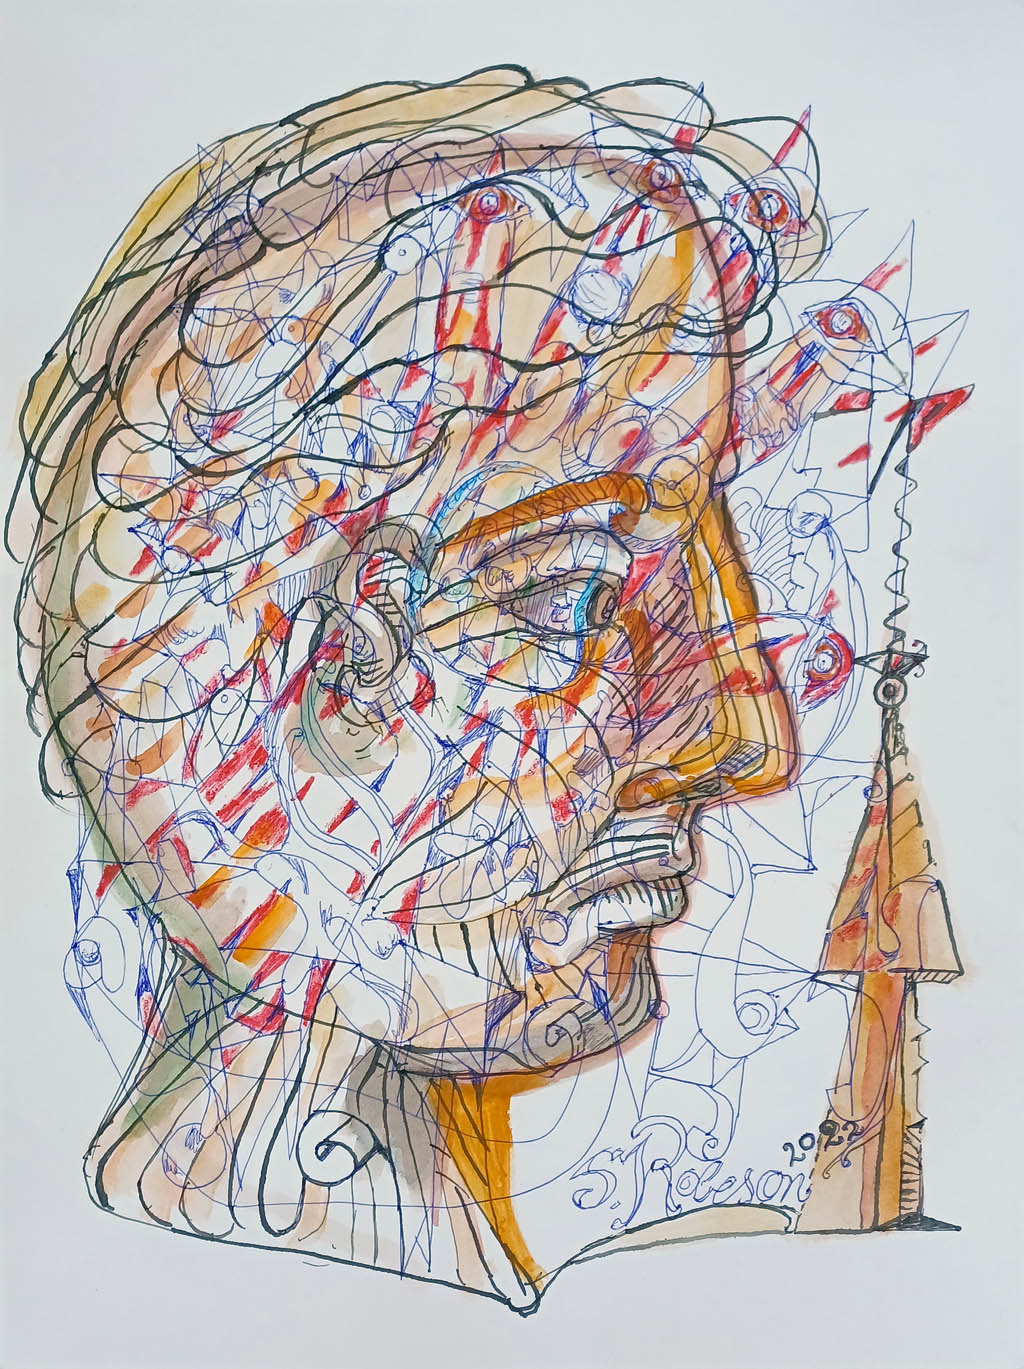 Stephen Robeson Miller - A Thousand Words - 2022 watercolor, ink, and graphite on paper